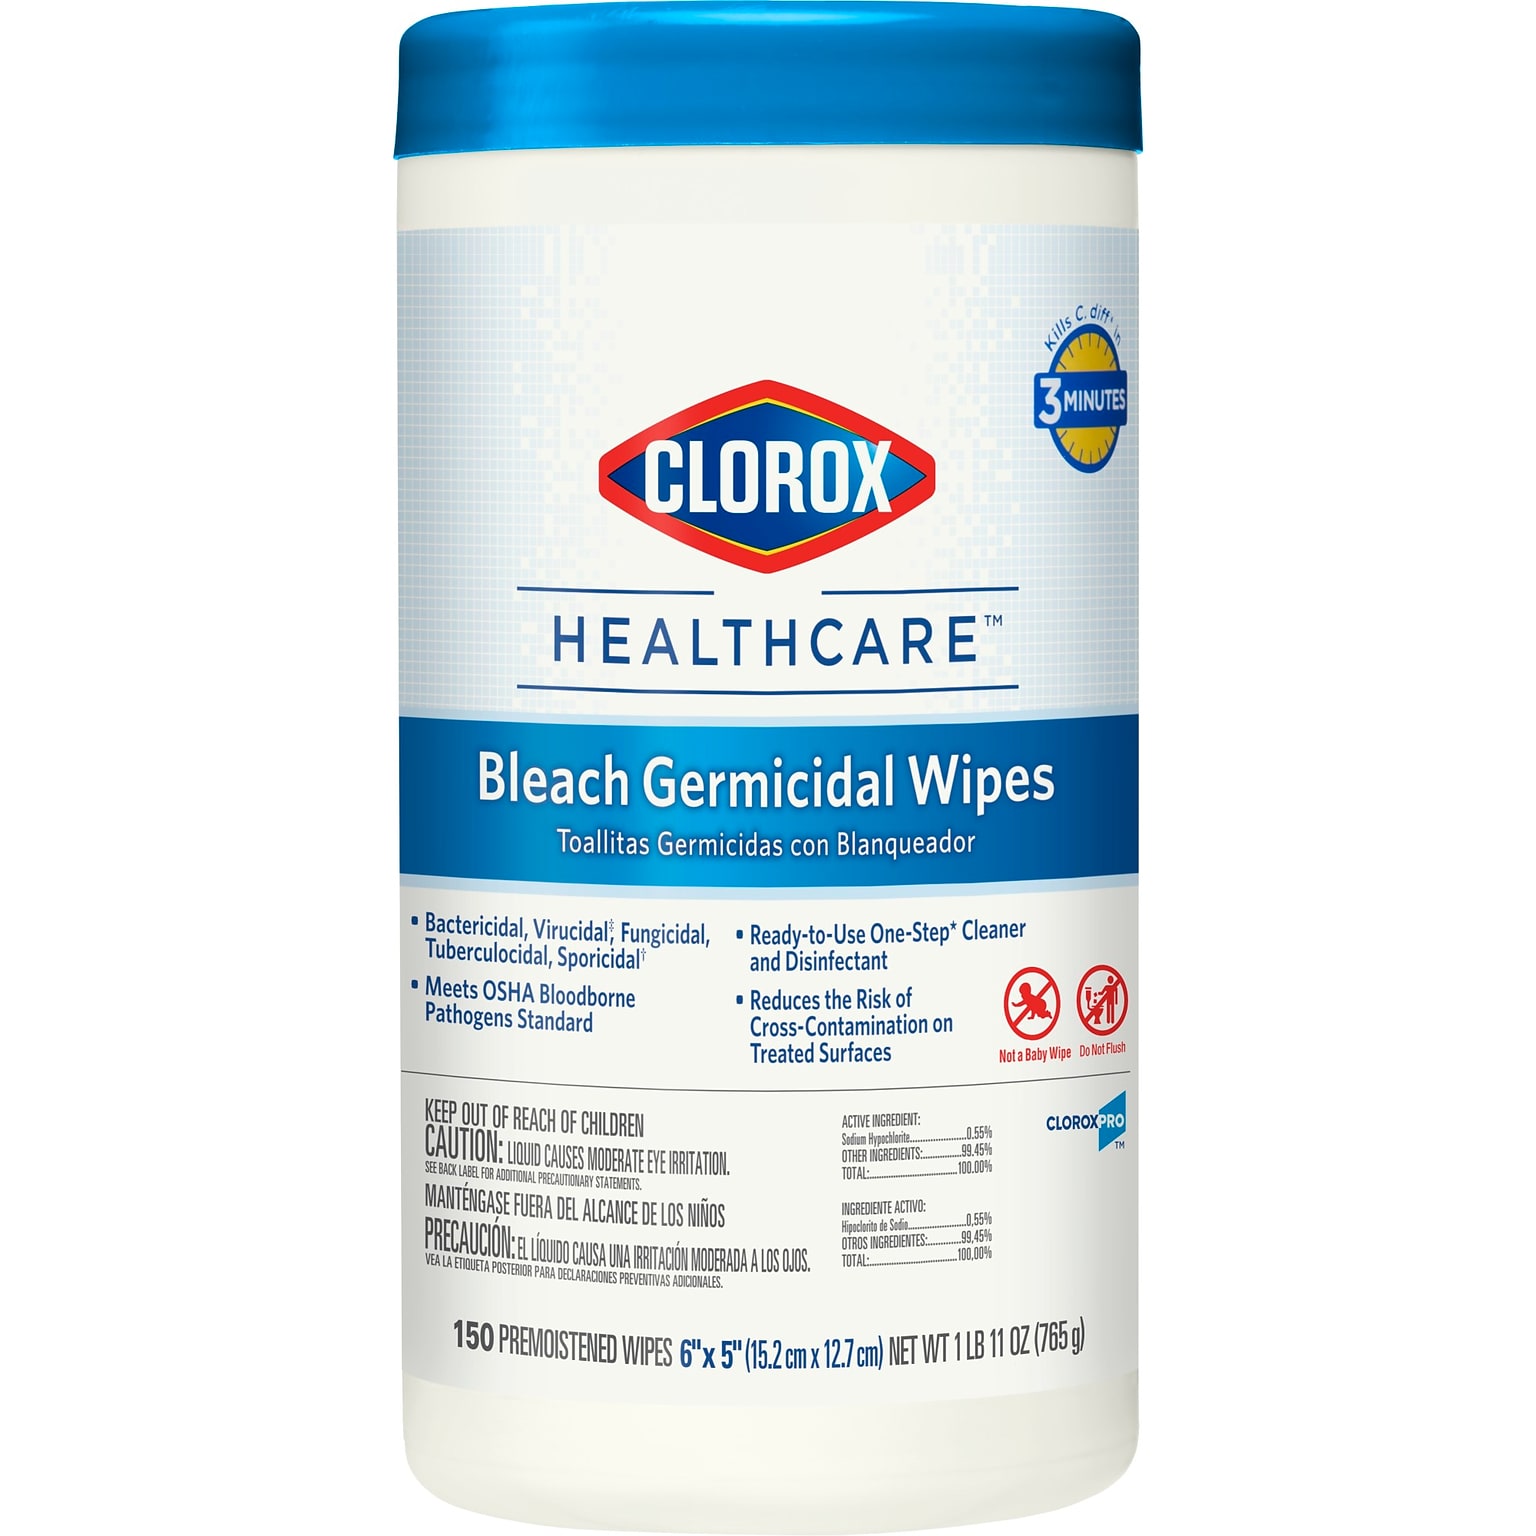 Clorox Healthcare Bleach Germicidal Wipes, 150 Count Canister (30577)